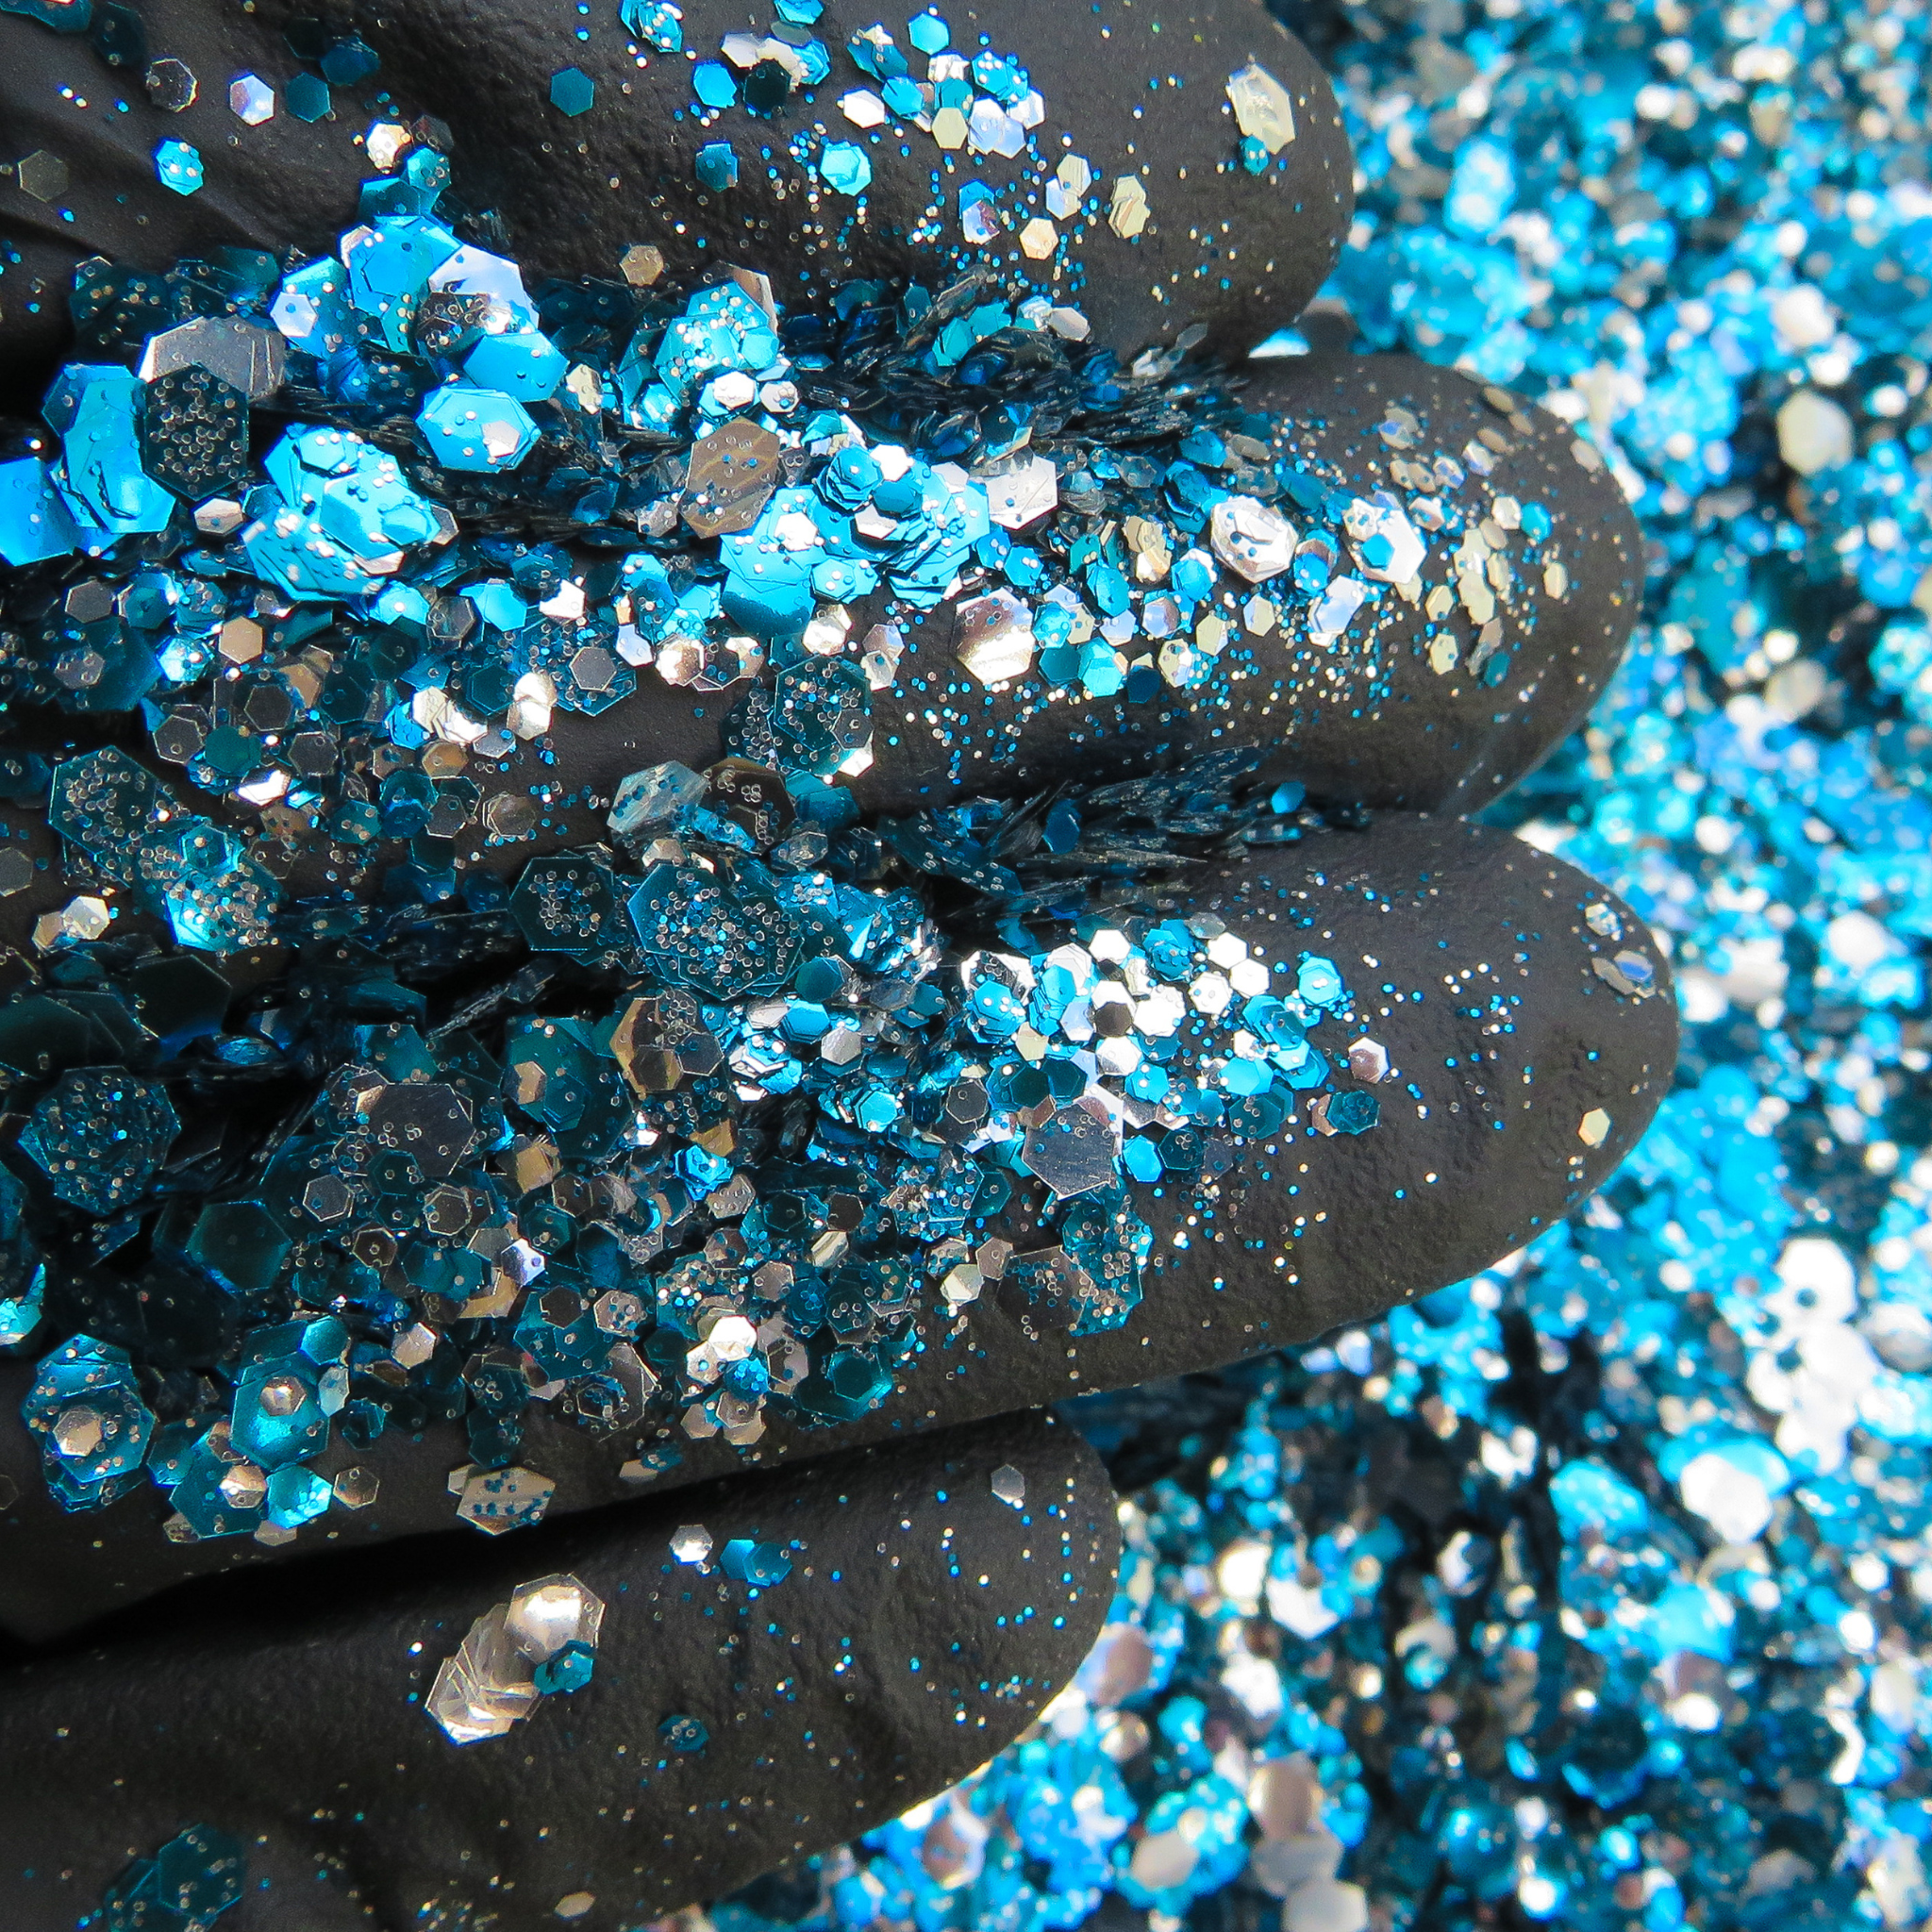 Moon river biodegradable glitter close up on a black glove